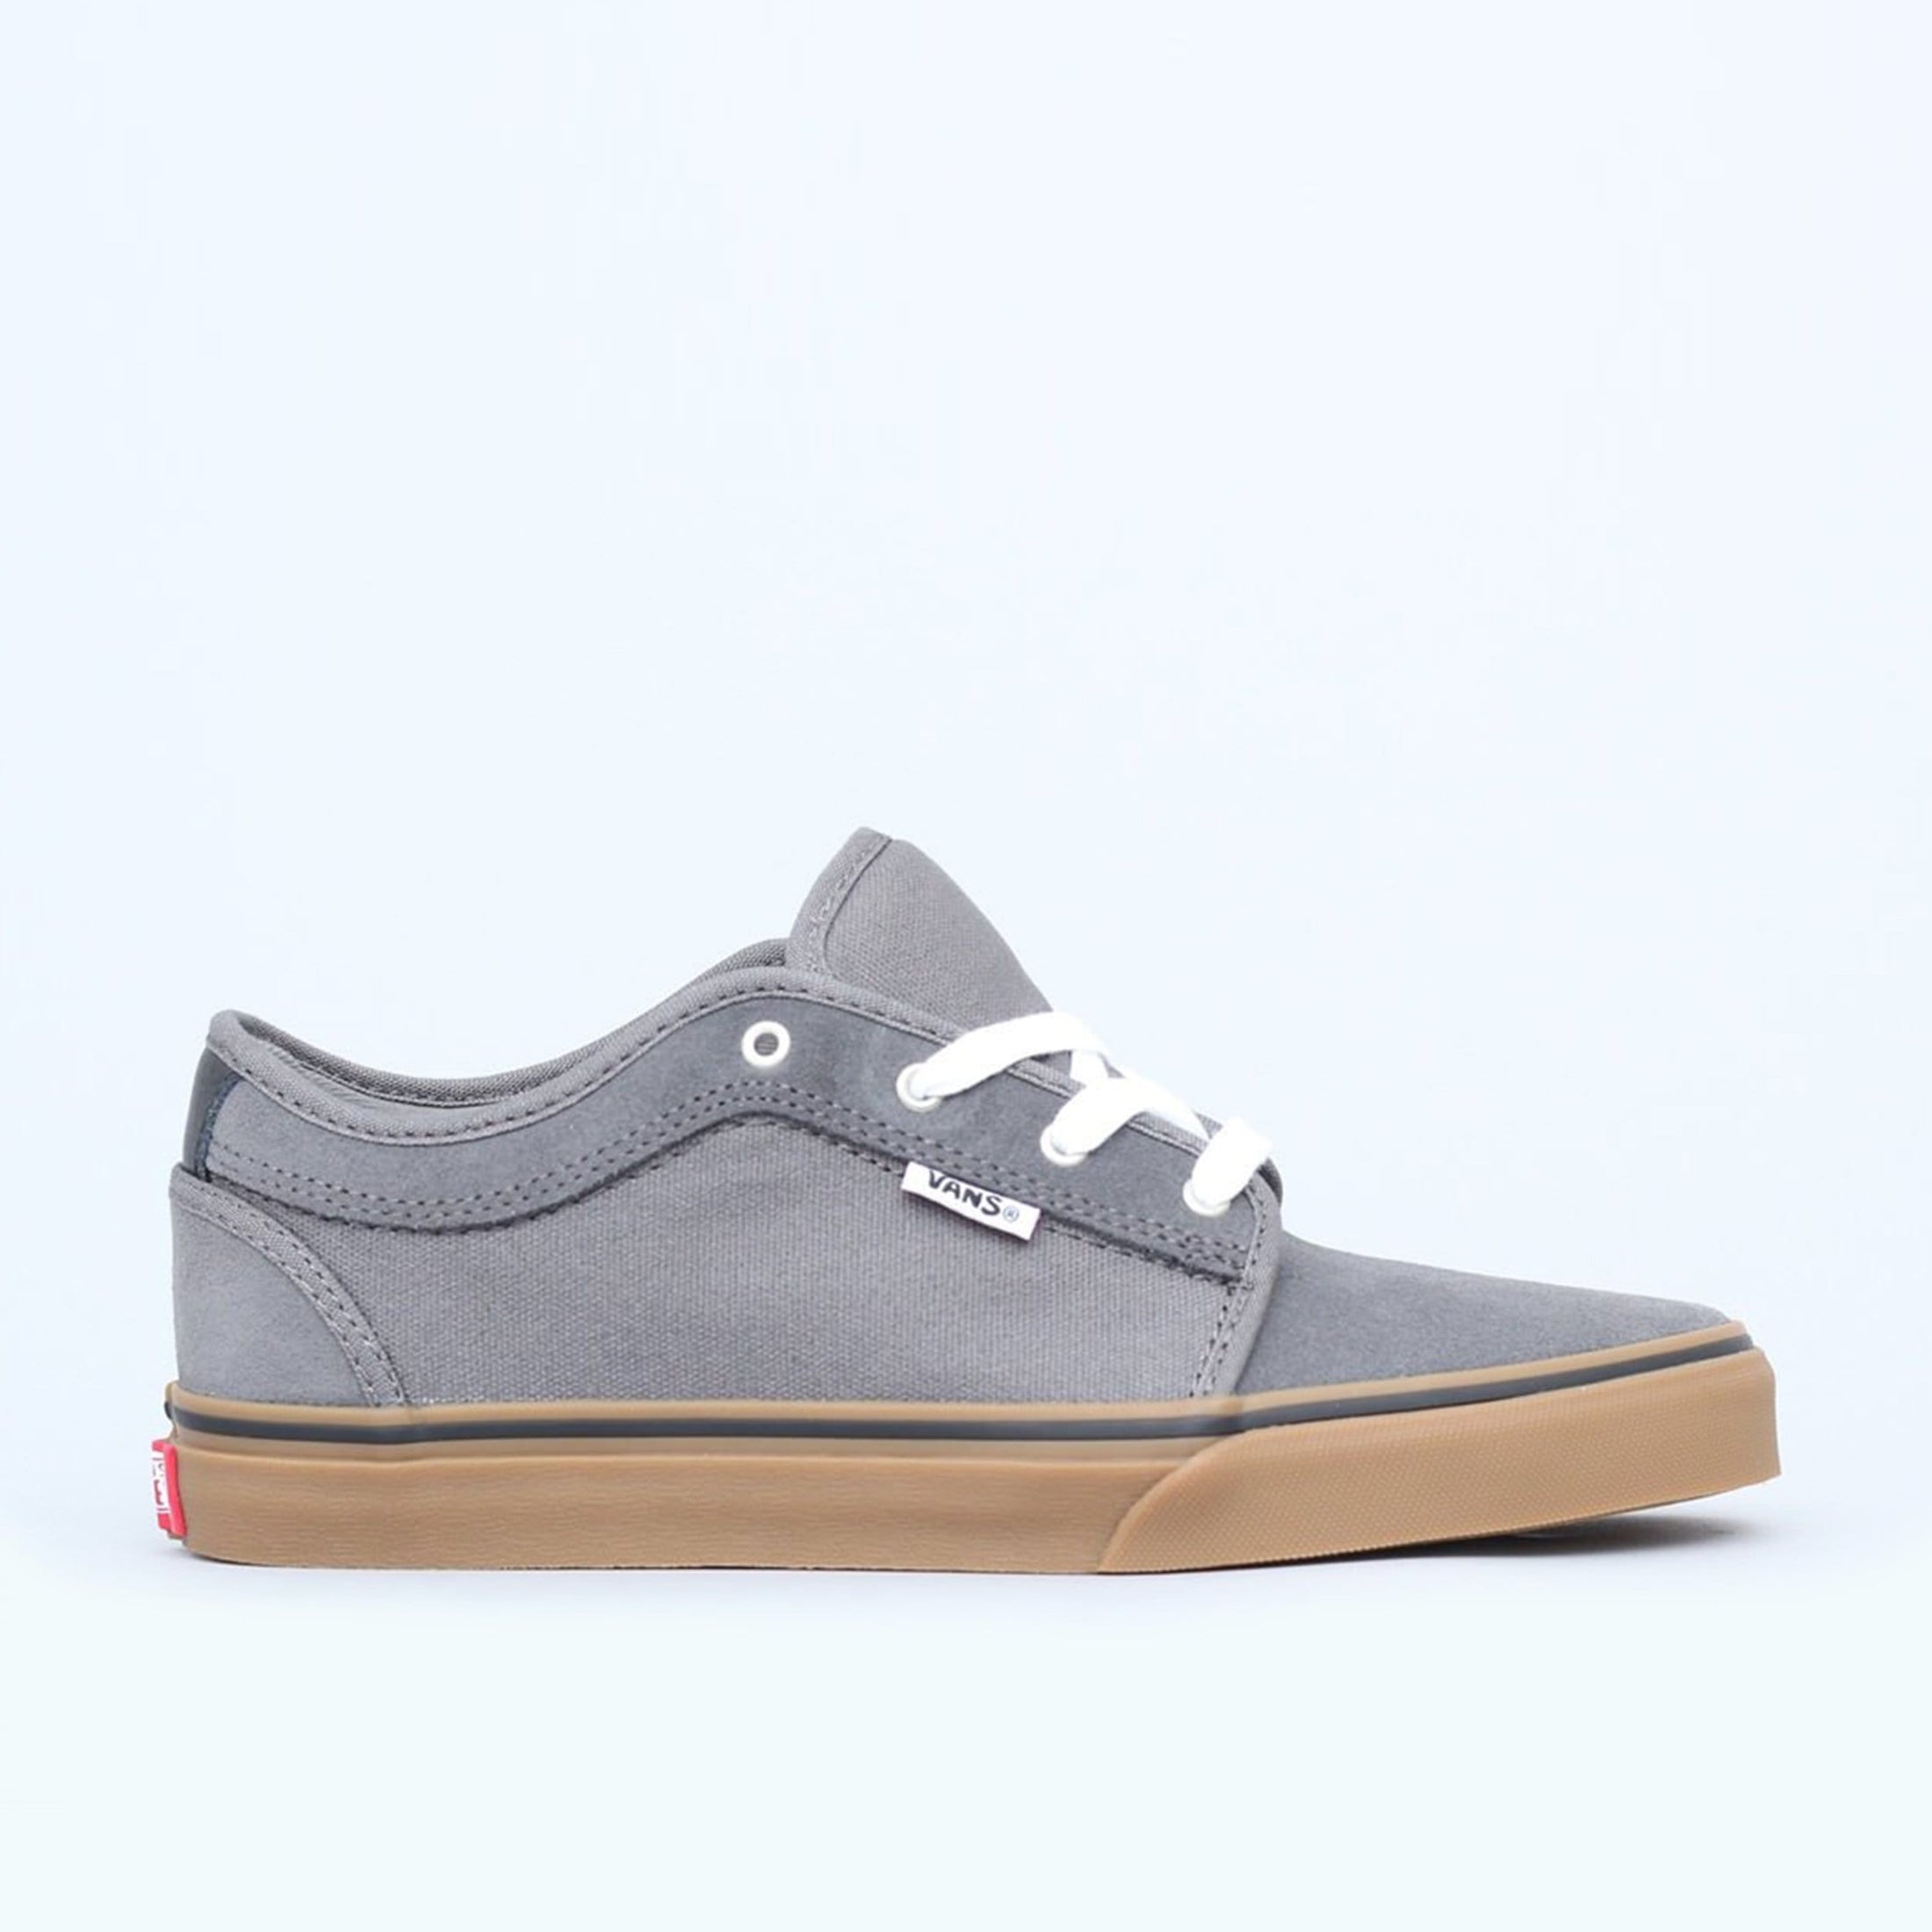 Vans Chukka Low Youth Shoes Pewter / White / Gum